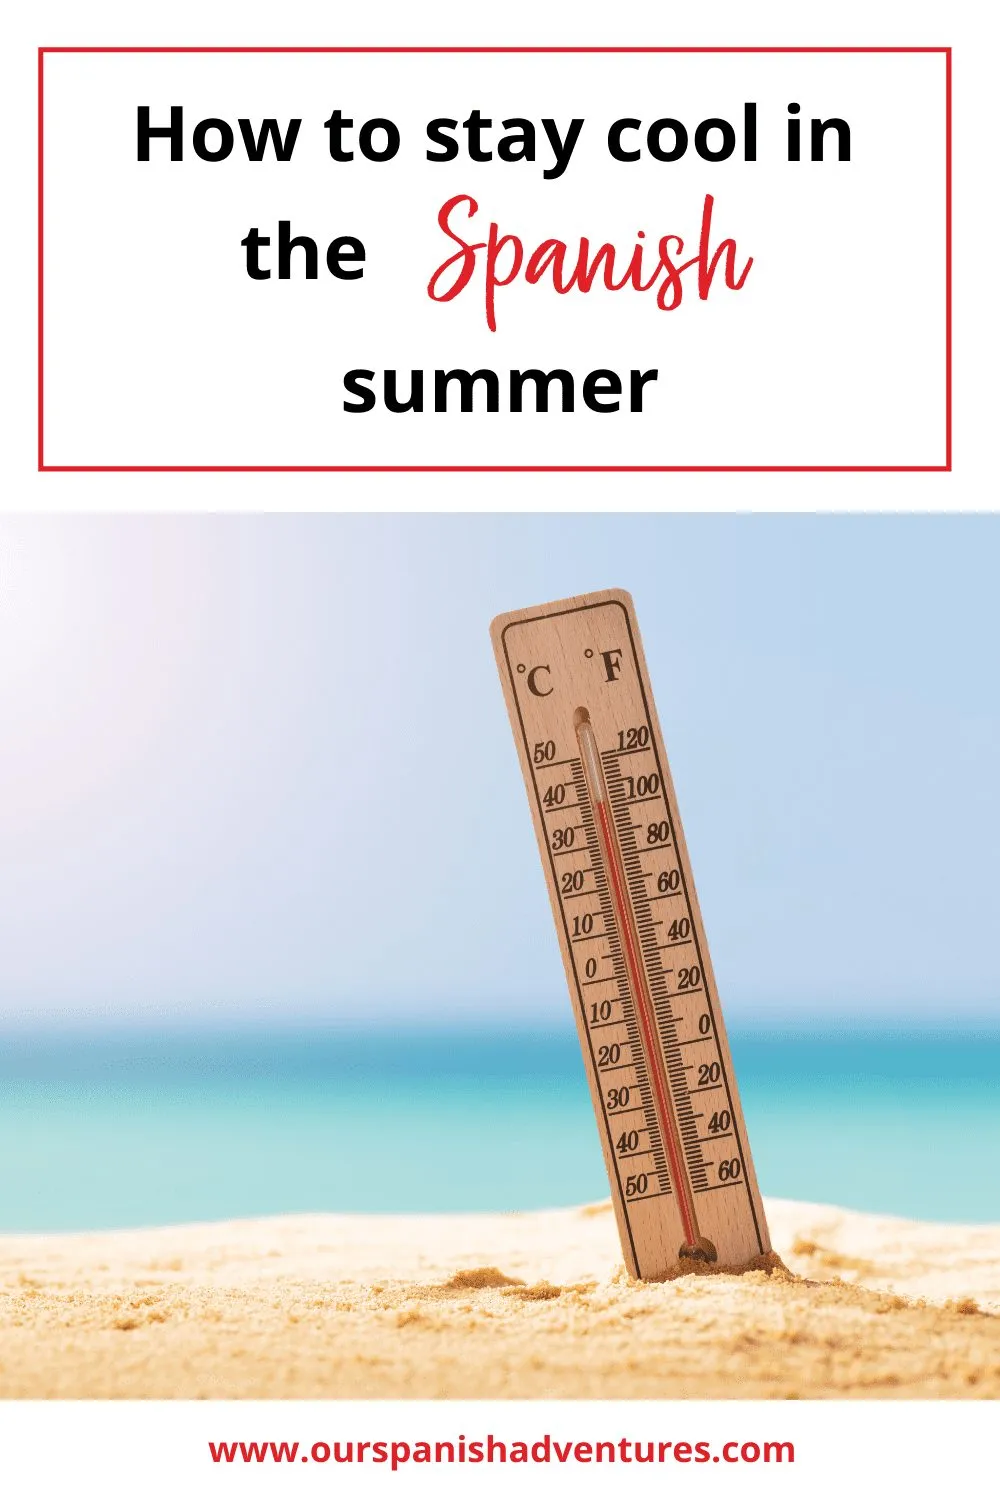 How to stay cool in the Spanish summer | Our Spanish Adventures